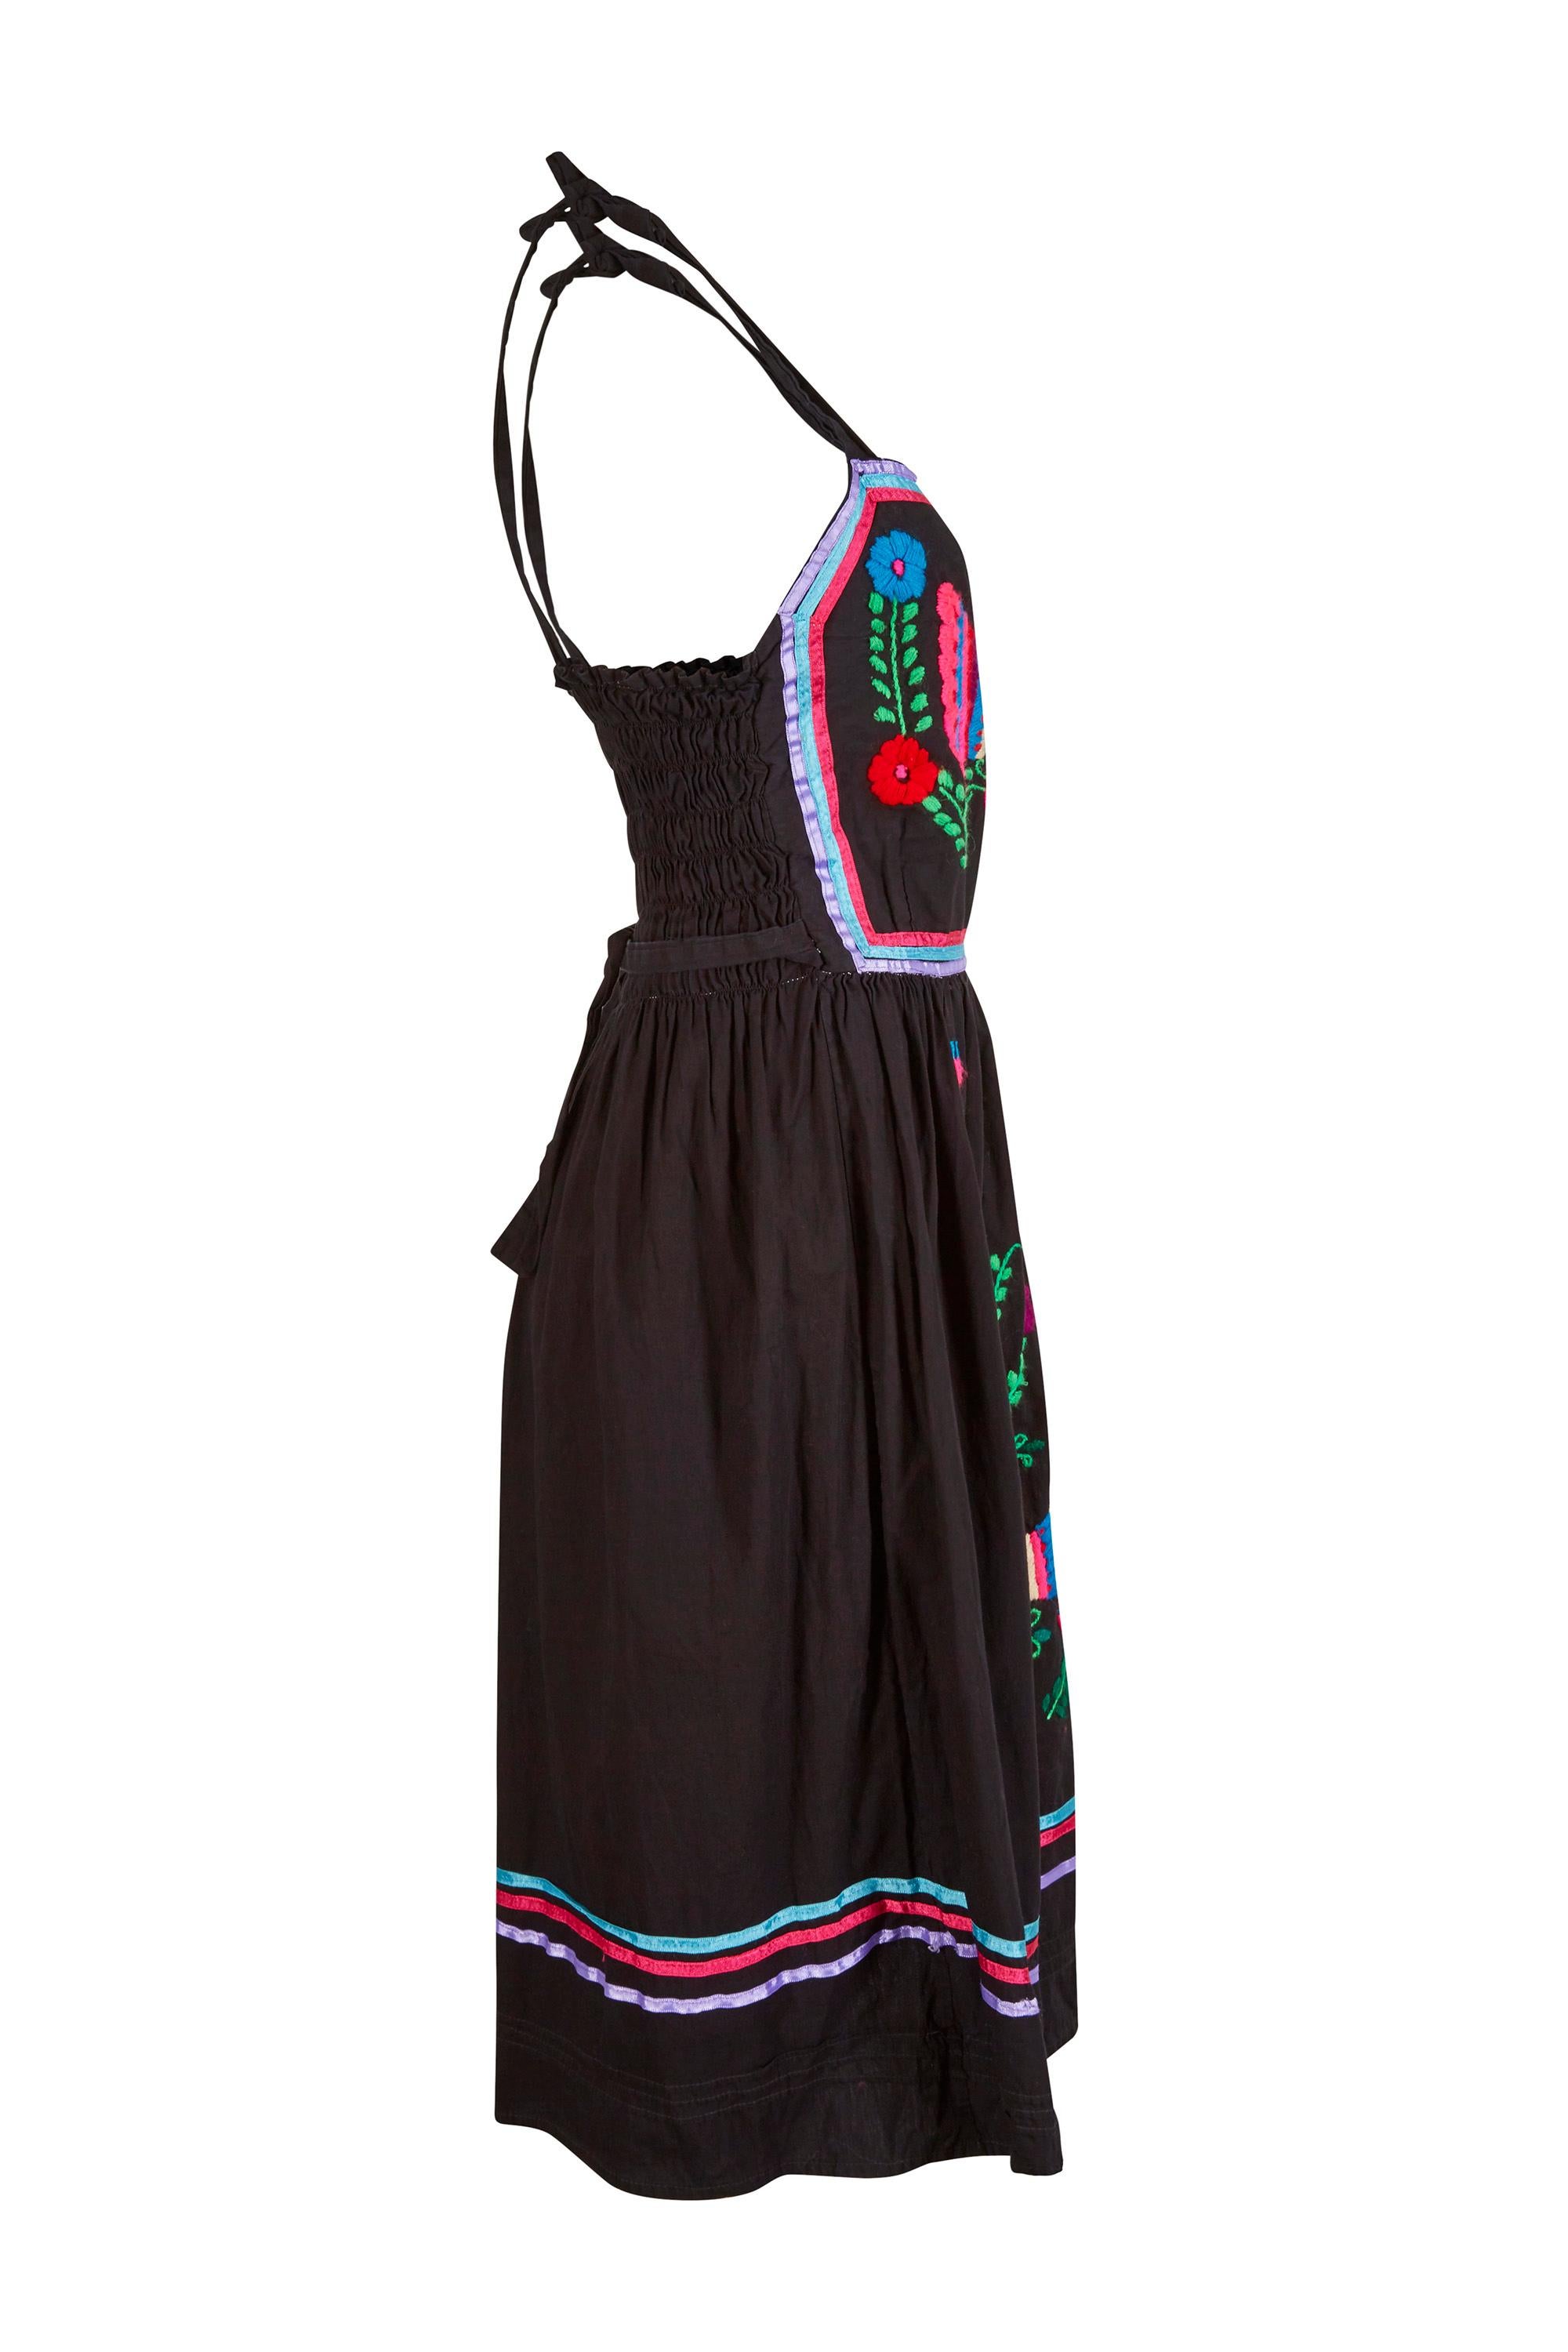 This wonderful 1970s black cotton sundress with colourful hand embroidery is a beautiful example of the Mexicana style popular in the 60s and 70s and is an American label emulating the traditional Mexican Huipil dress to perfection. The thick cotton